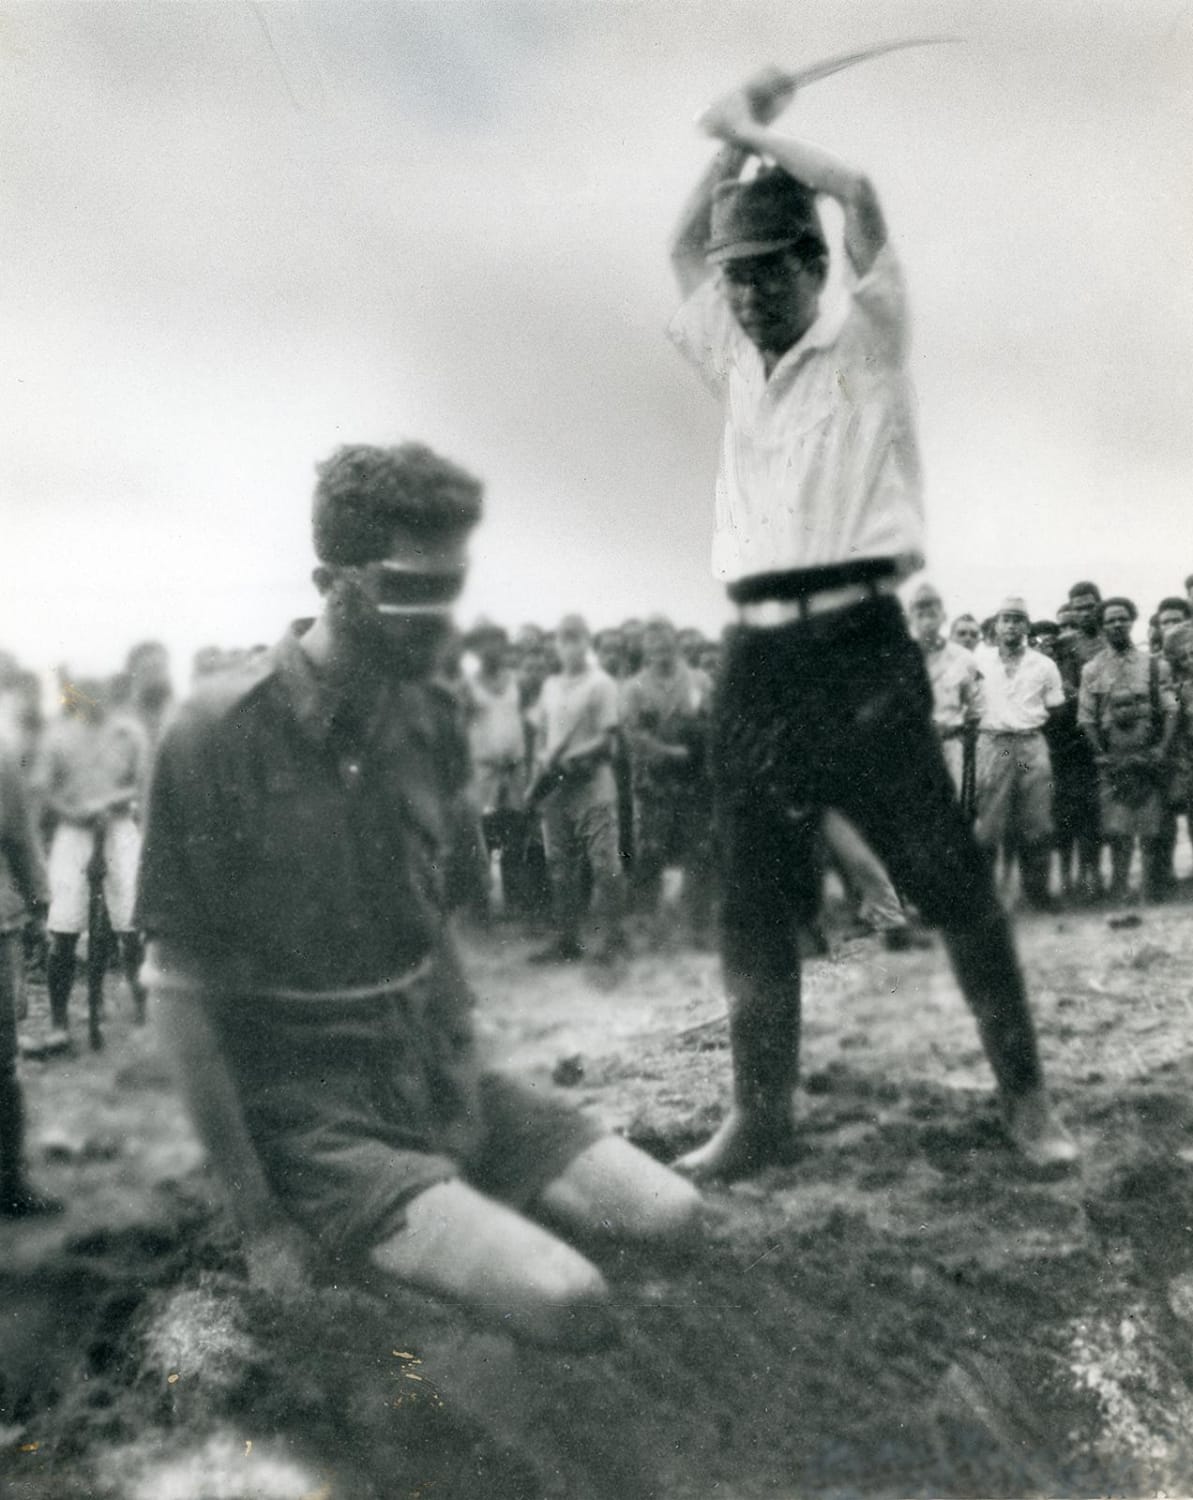 Australian Special Forces radio operator Leonard Siffleet about to be executed by a Japanese officer, Aitape Beach, Papua New Guinea, on October 24, 1943.